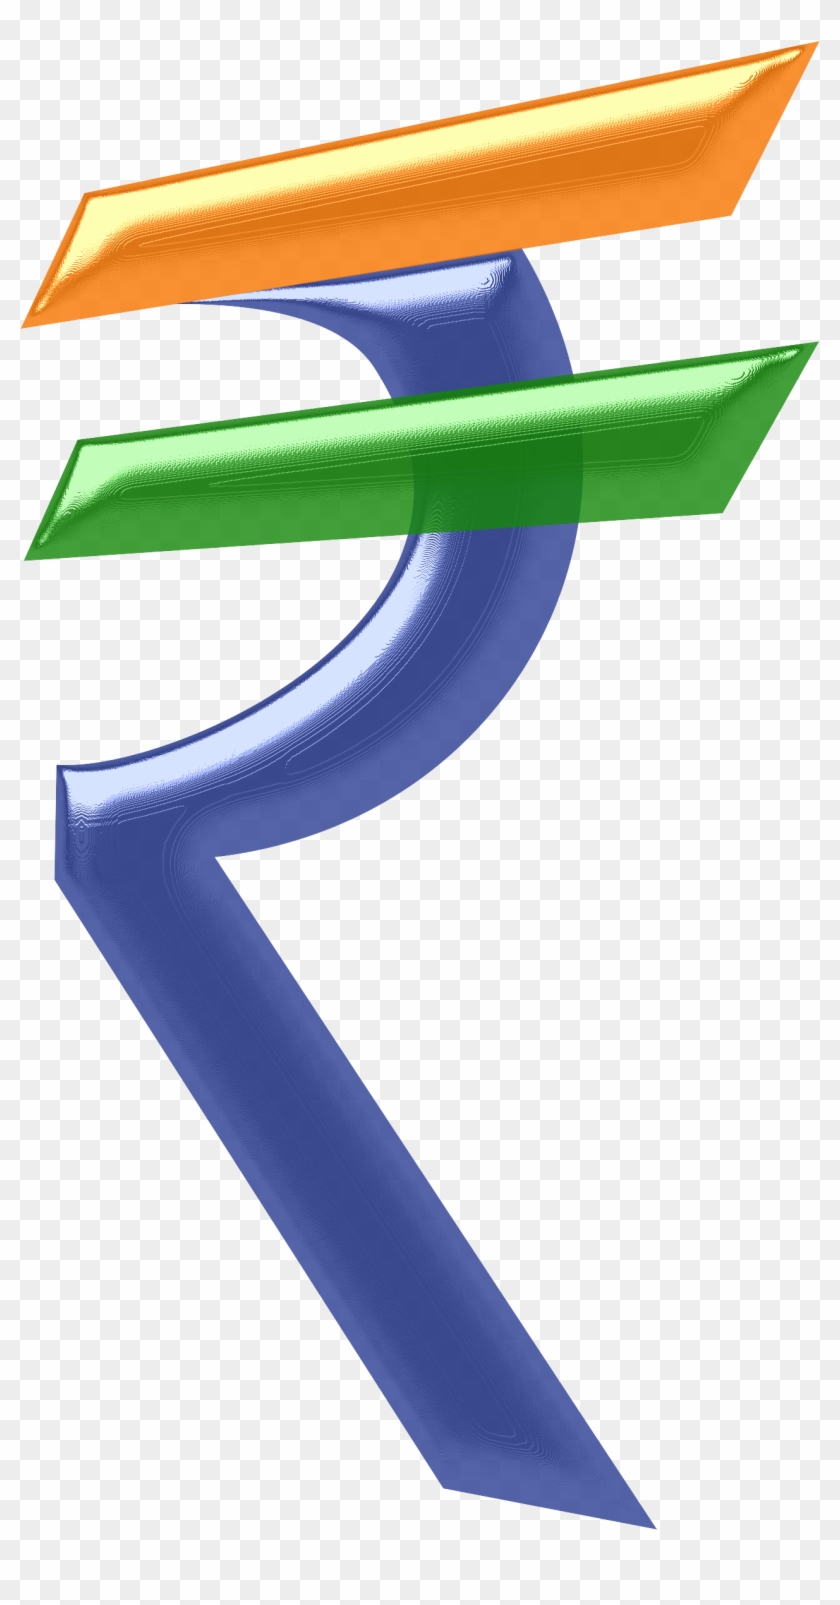 Indian Rupees Png Images - Indian Rupee Symbol Meaning #3147